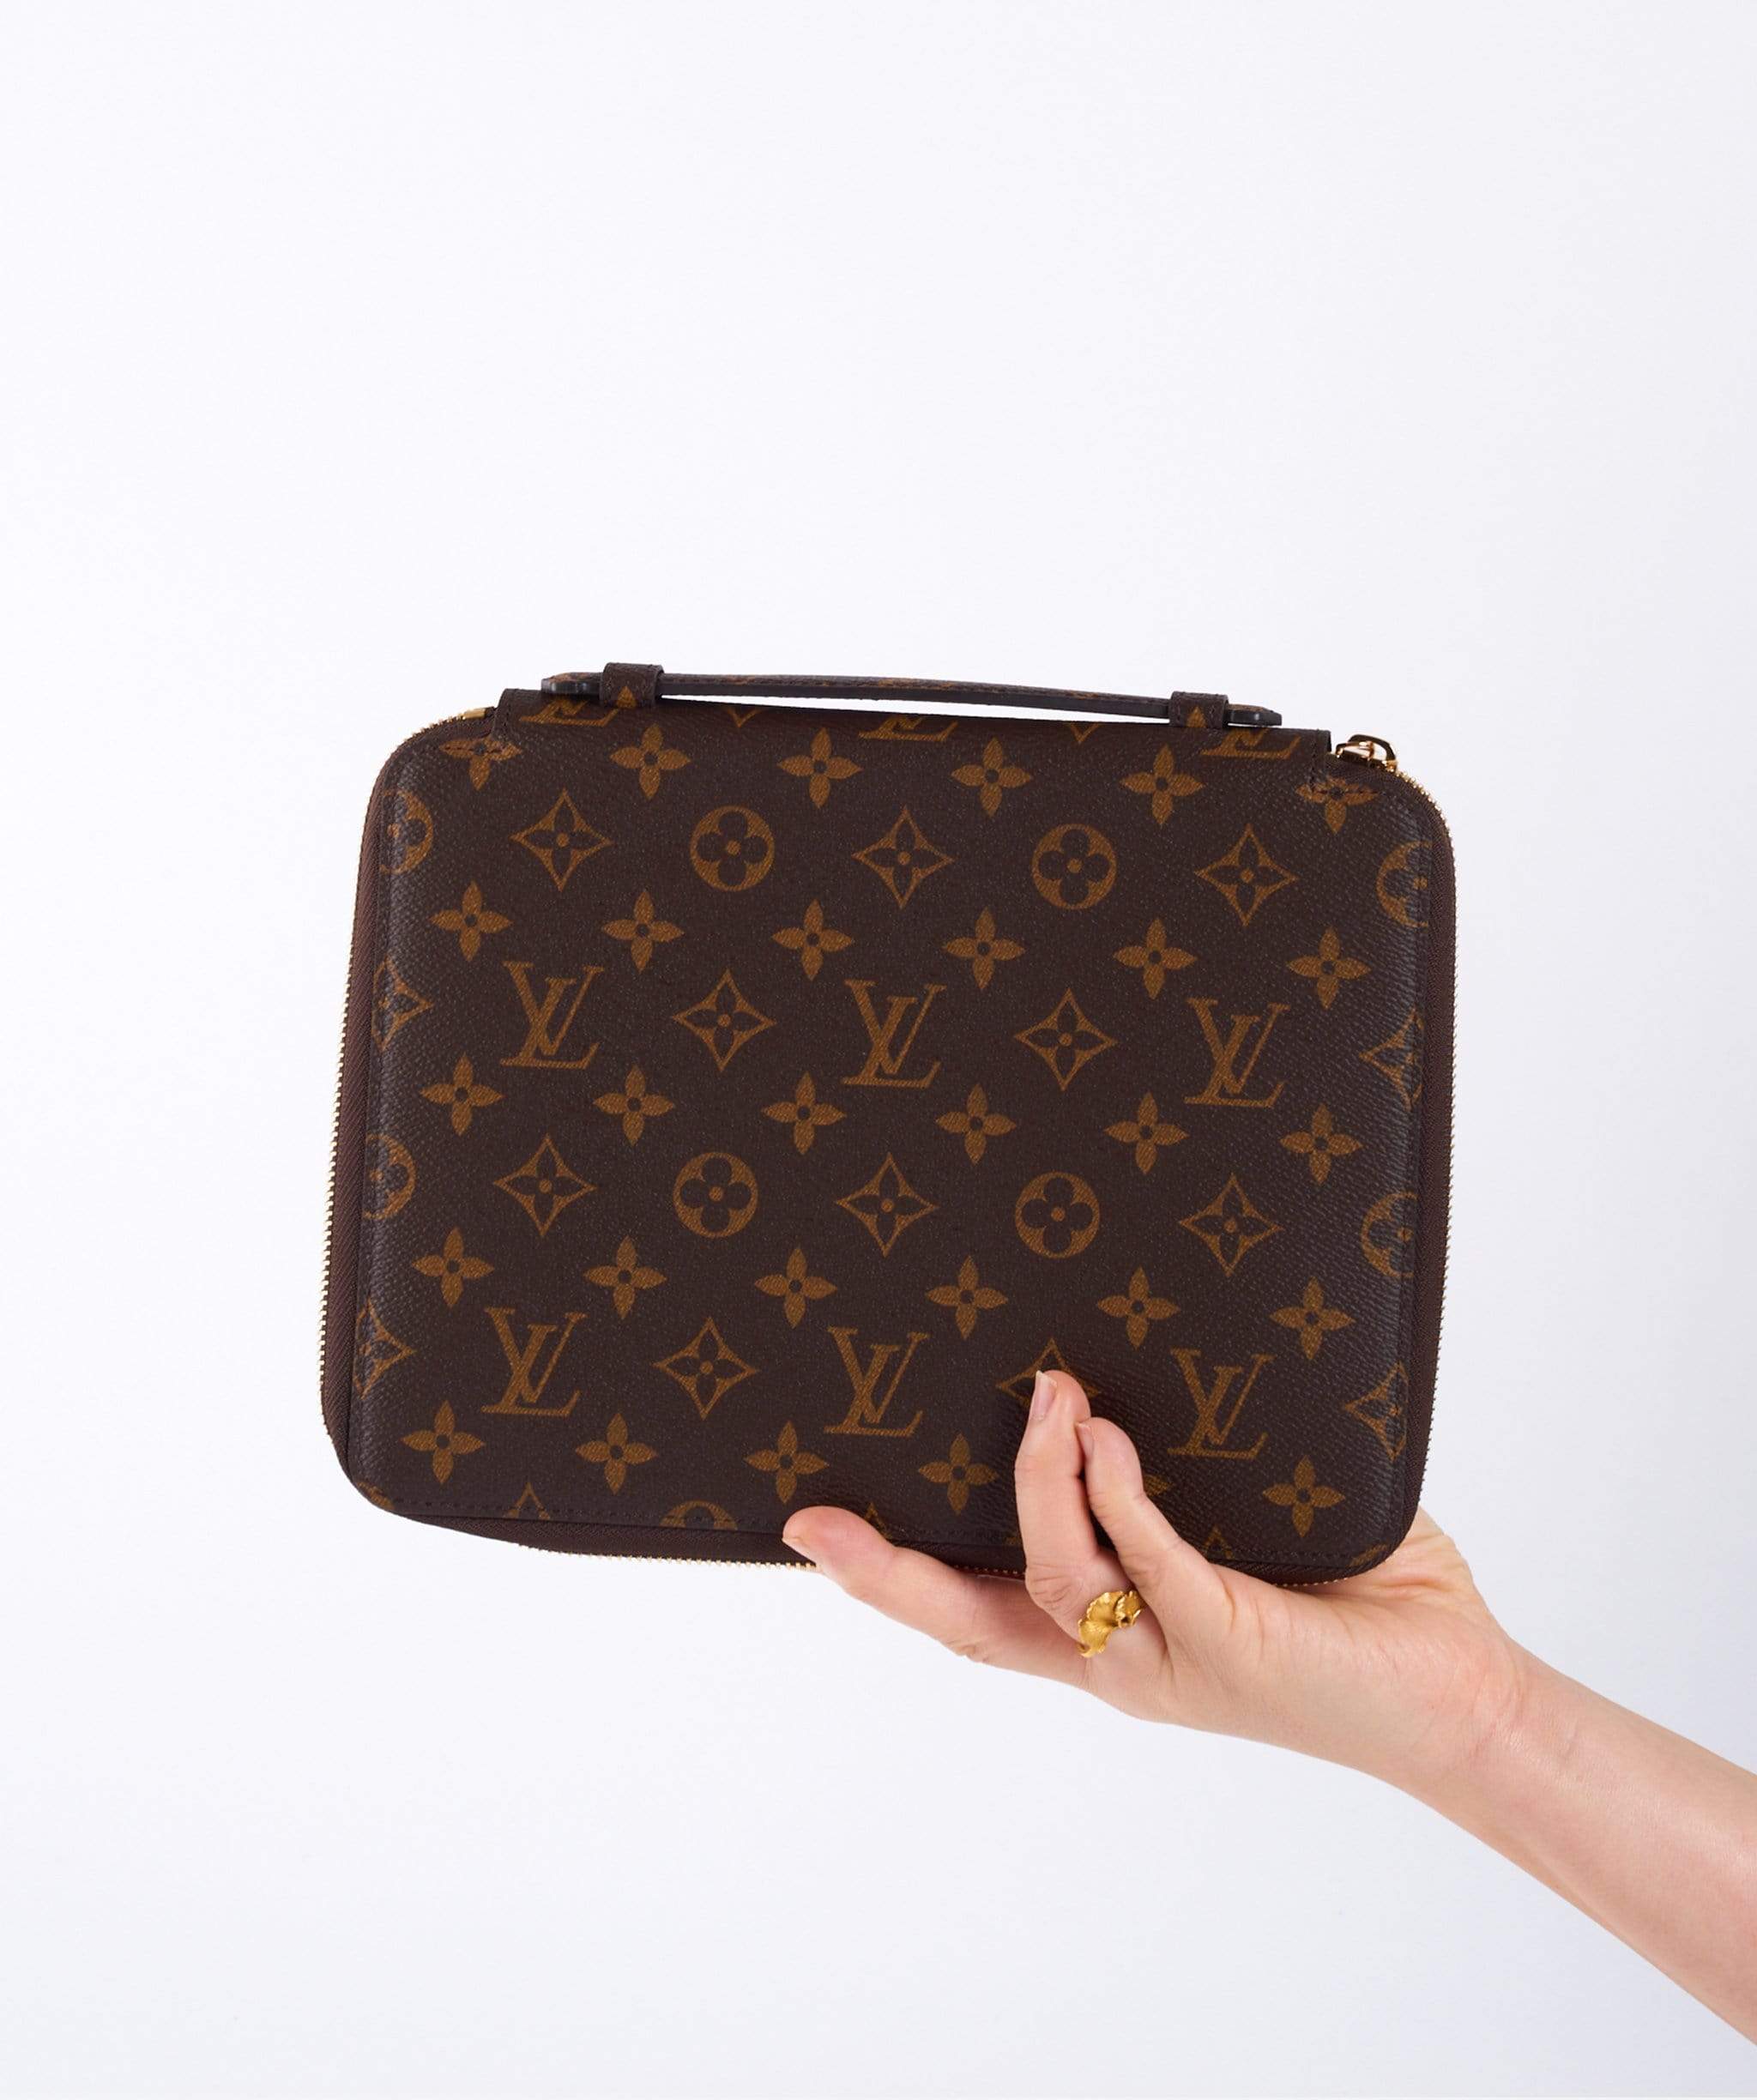 What Department Stores Sell Louis Vuitton Online